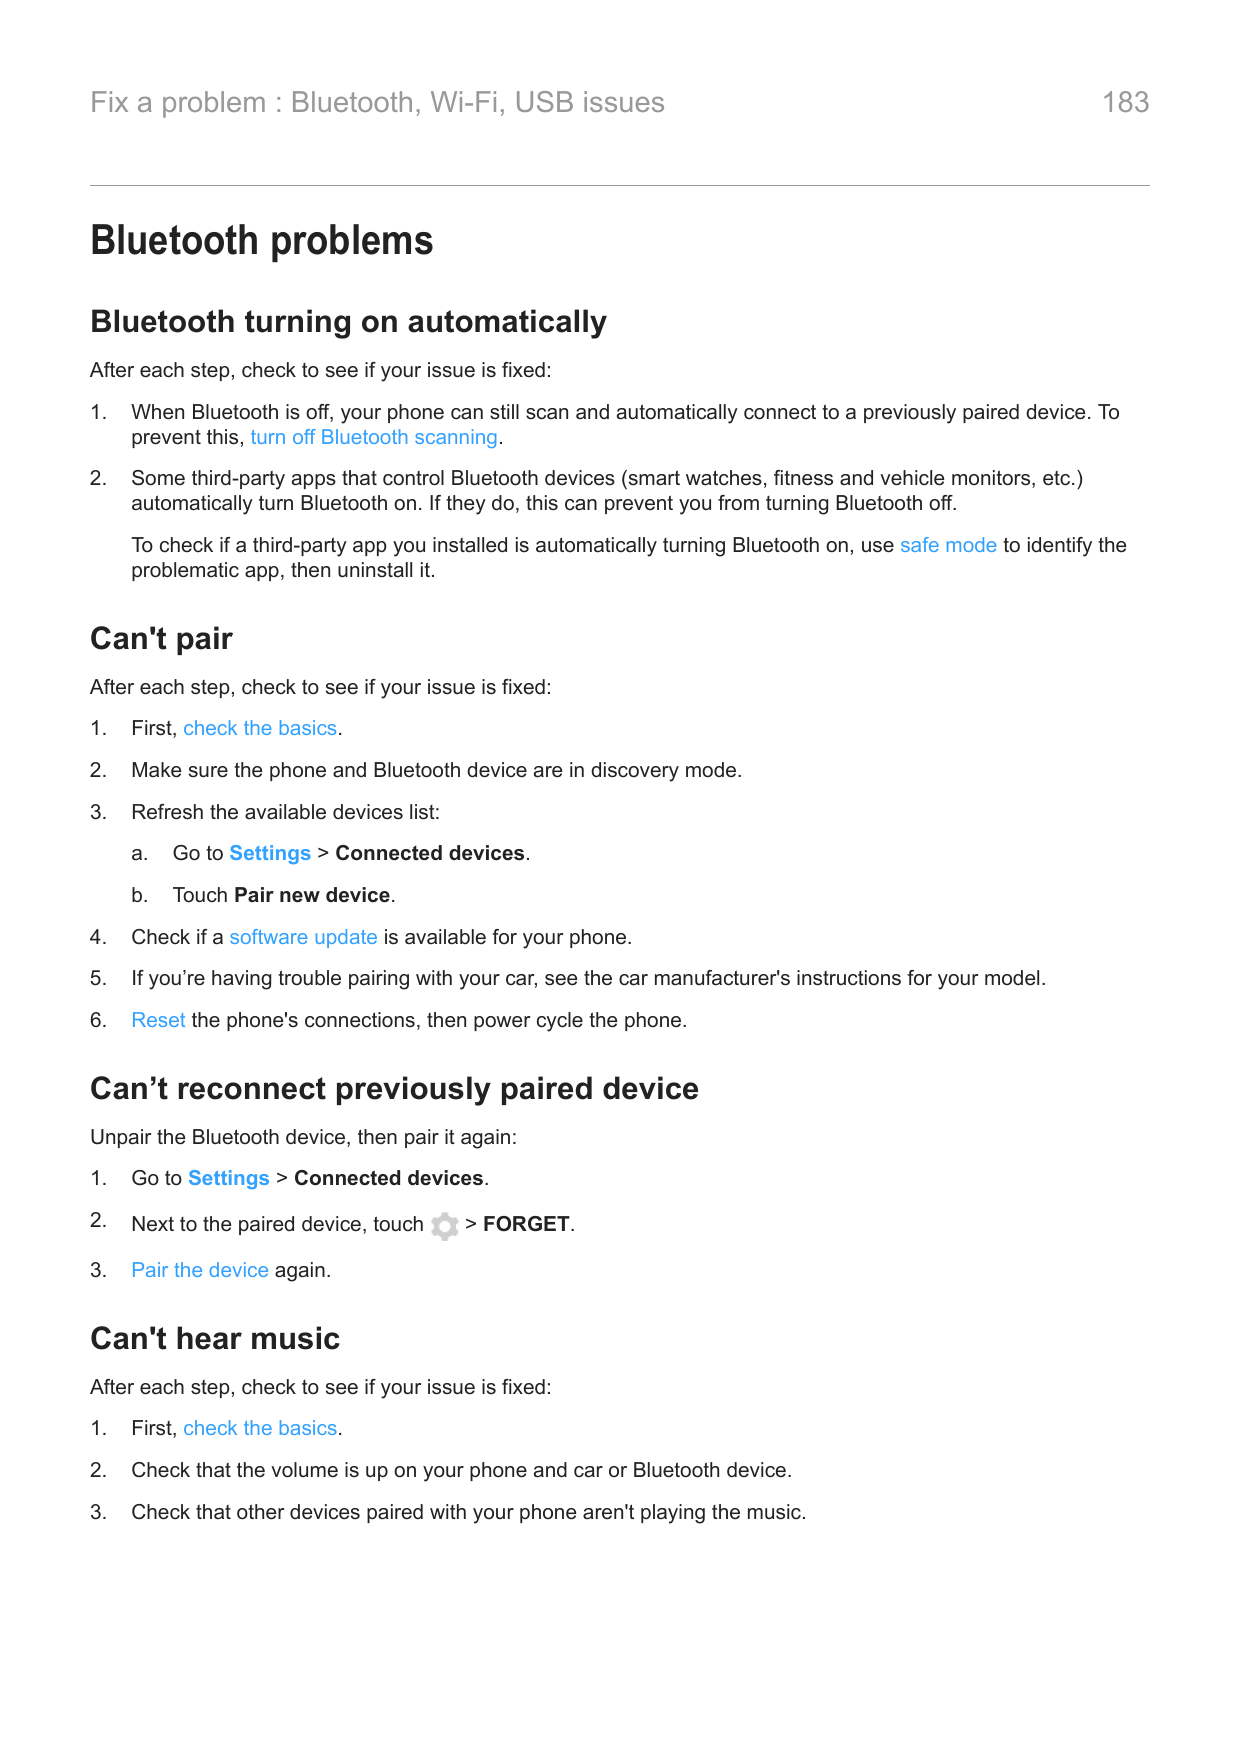 Fix a problem : Bluetooth, Wi-Fi, USB issues183Bluetooth problemsBluetooth turning on automaticallyAfter each step, check to see